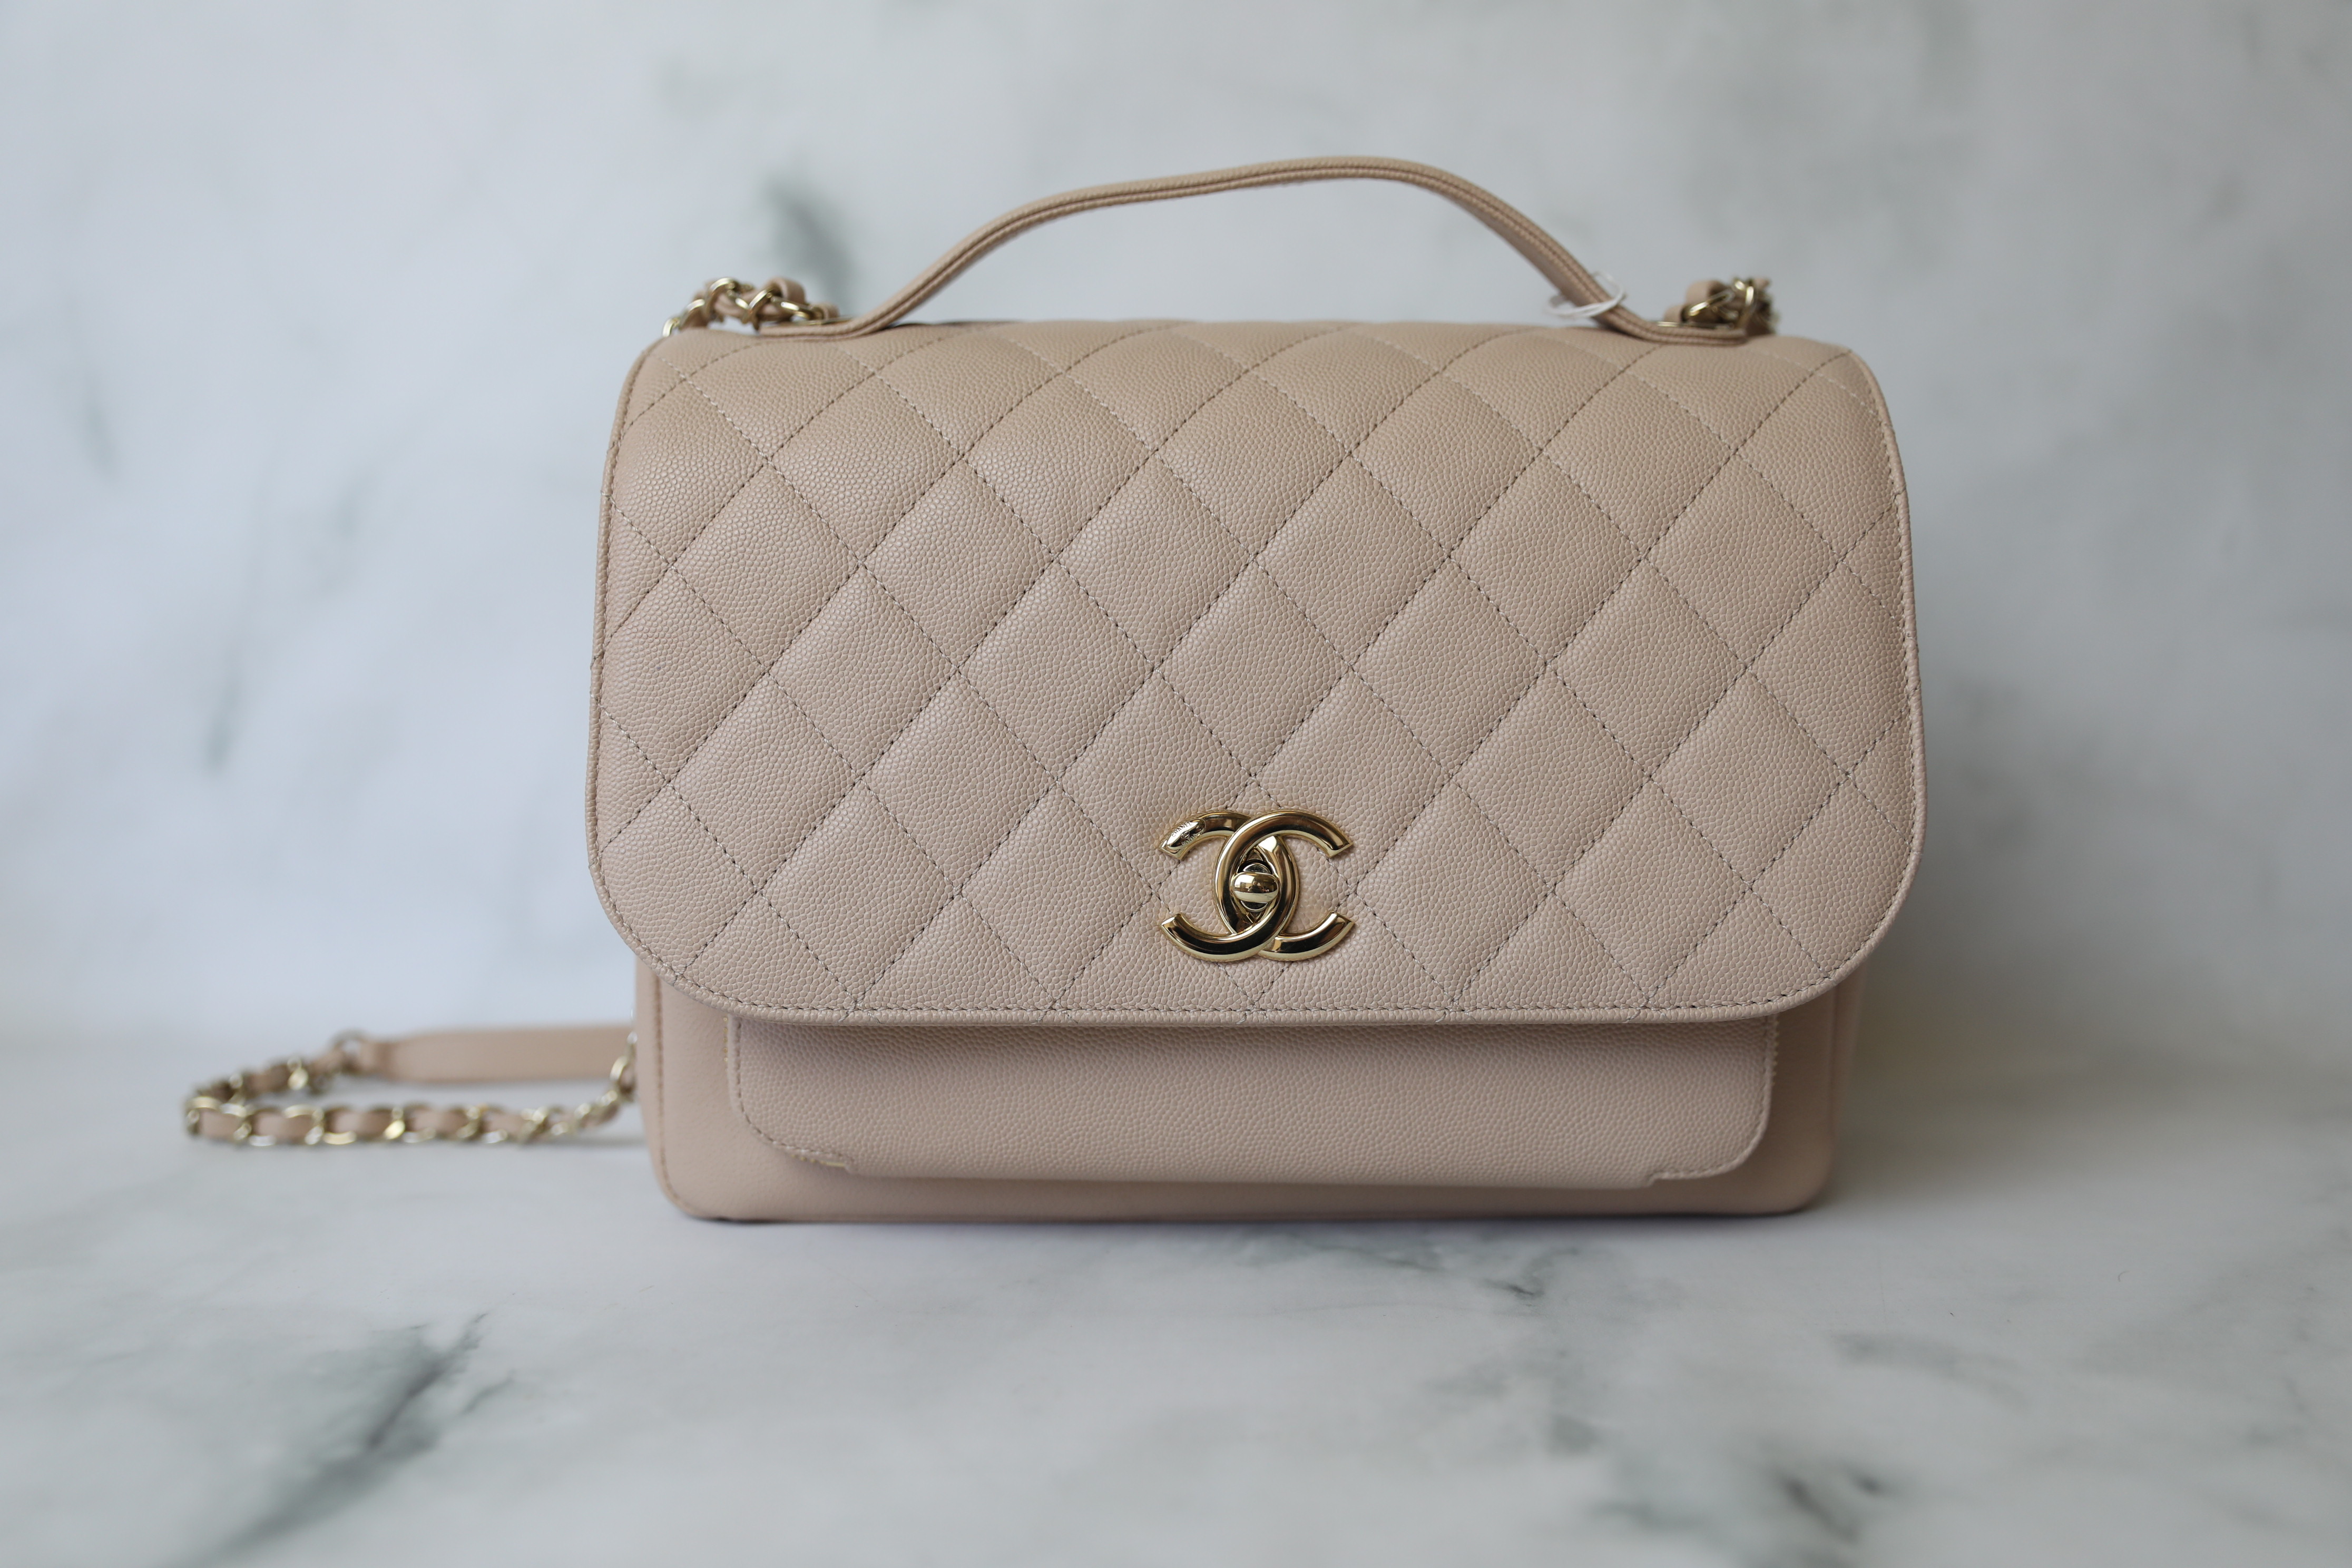 Chanel Business Affinity White Caviar Leather, Gold Hardware, Preowned In  Dustbag (Ships Duty Free From London) - Julia Rose Boston